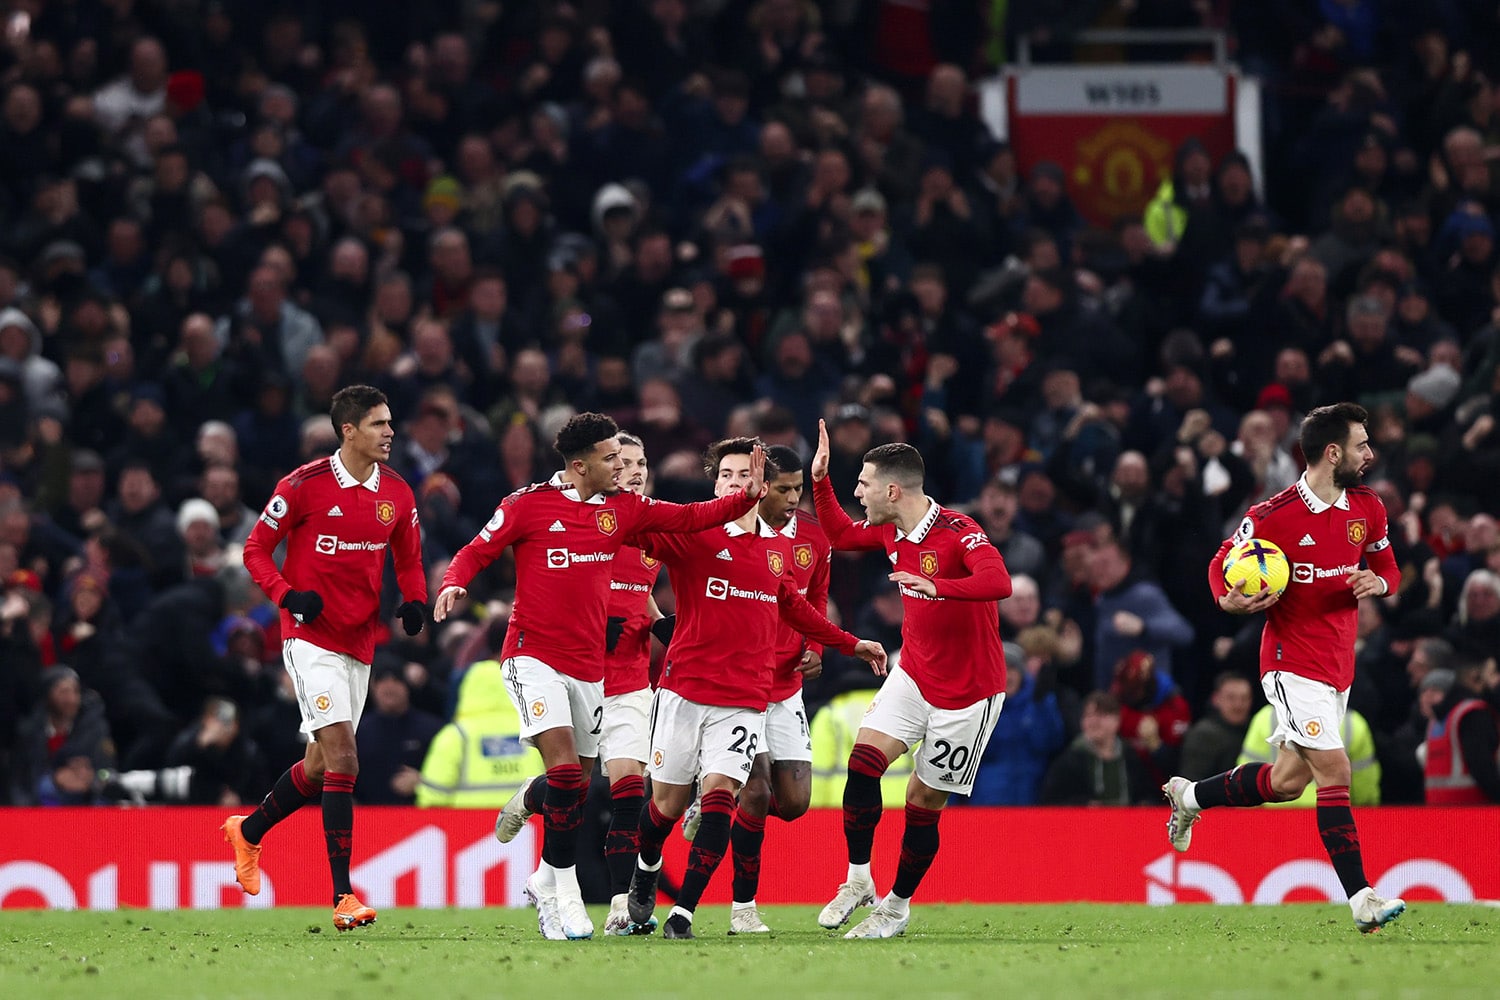 Manchester United players celebrate together after Jadon Sancho scores a goal in the Premier League at Old Trafford.